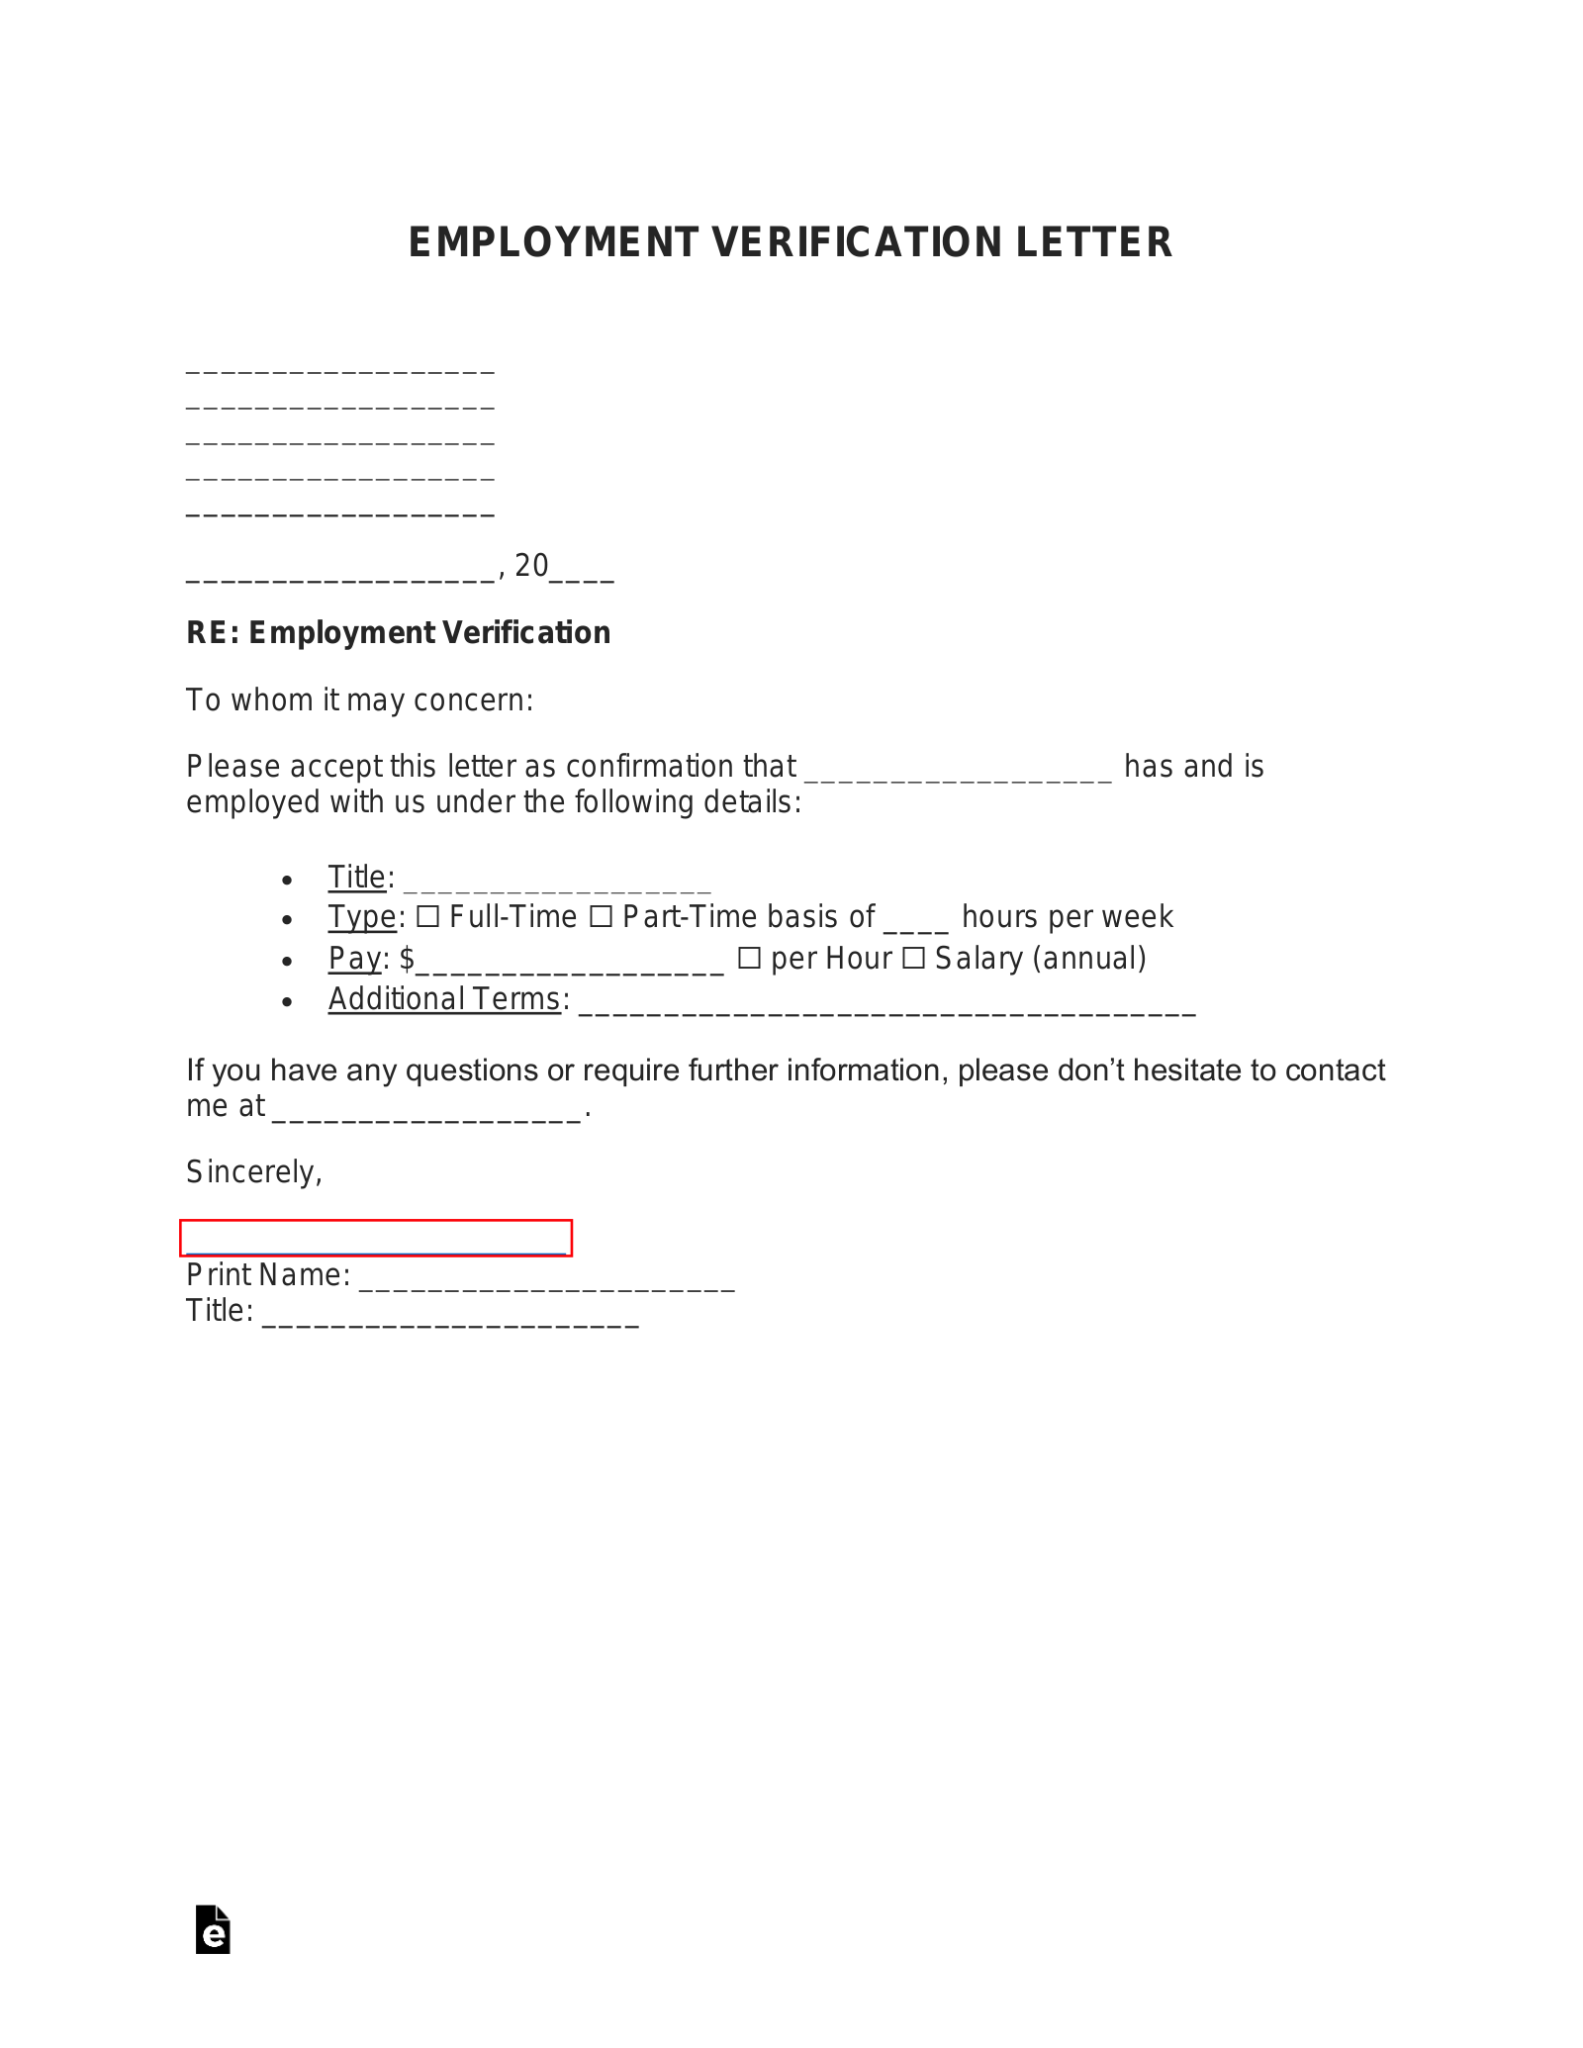 sample-blank-employment-verification-letter-every-last-template-free-17-employment